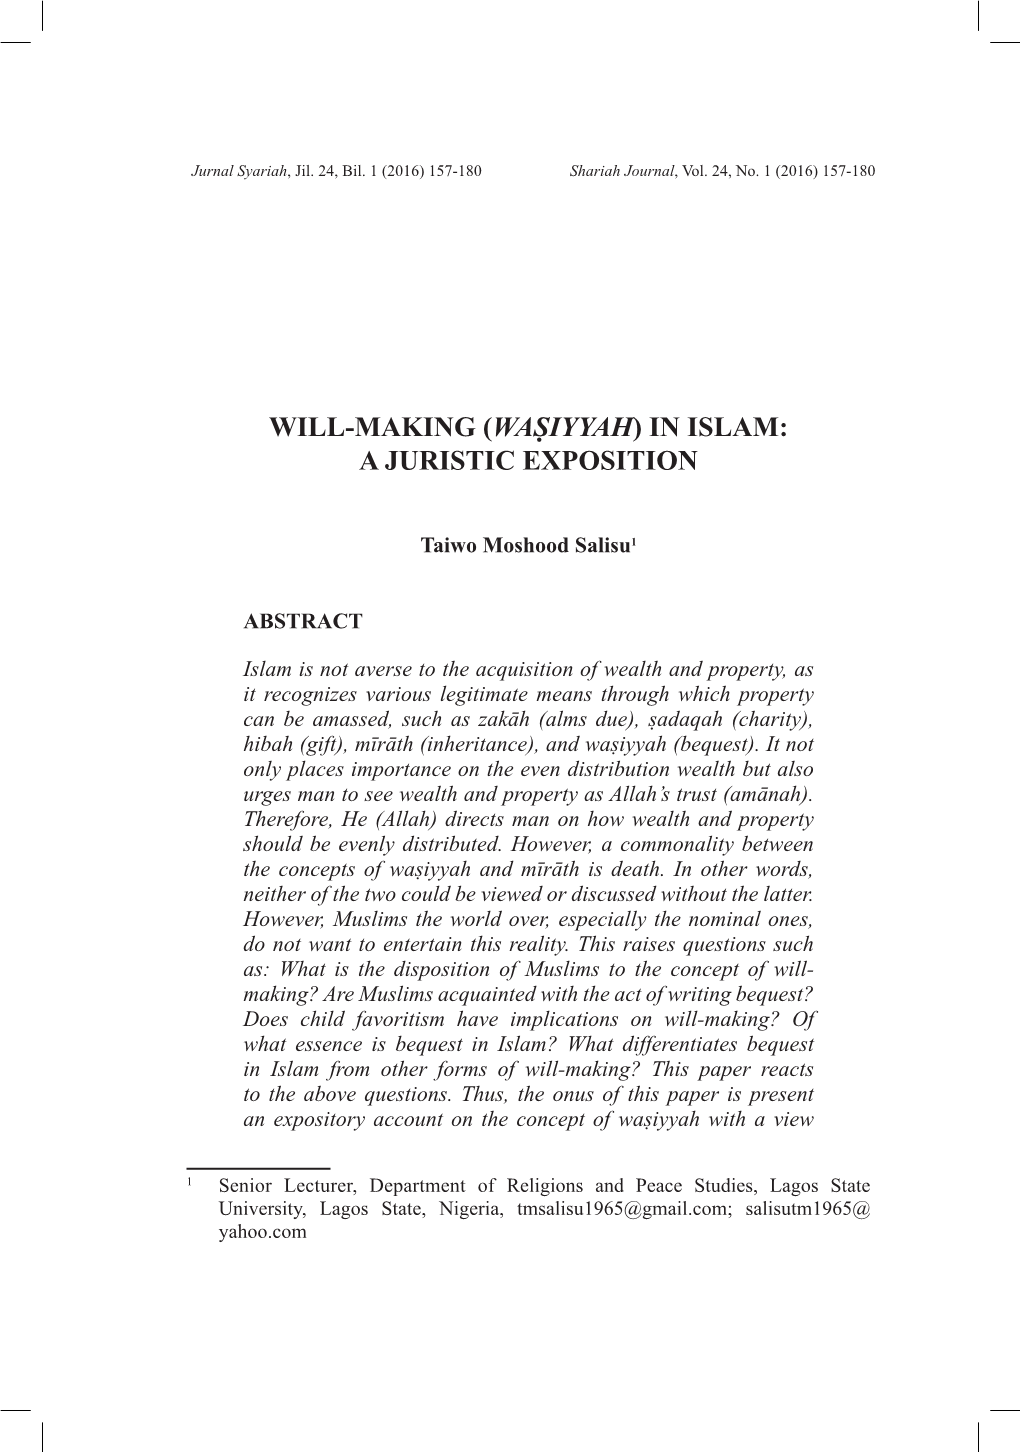 Will-Making (Waṣiyyah) in Islam: a Juristic Exposition